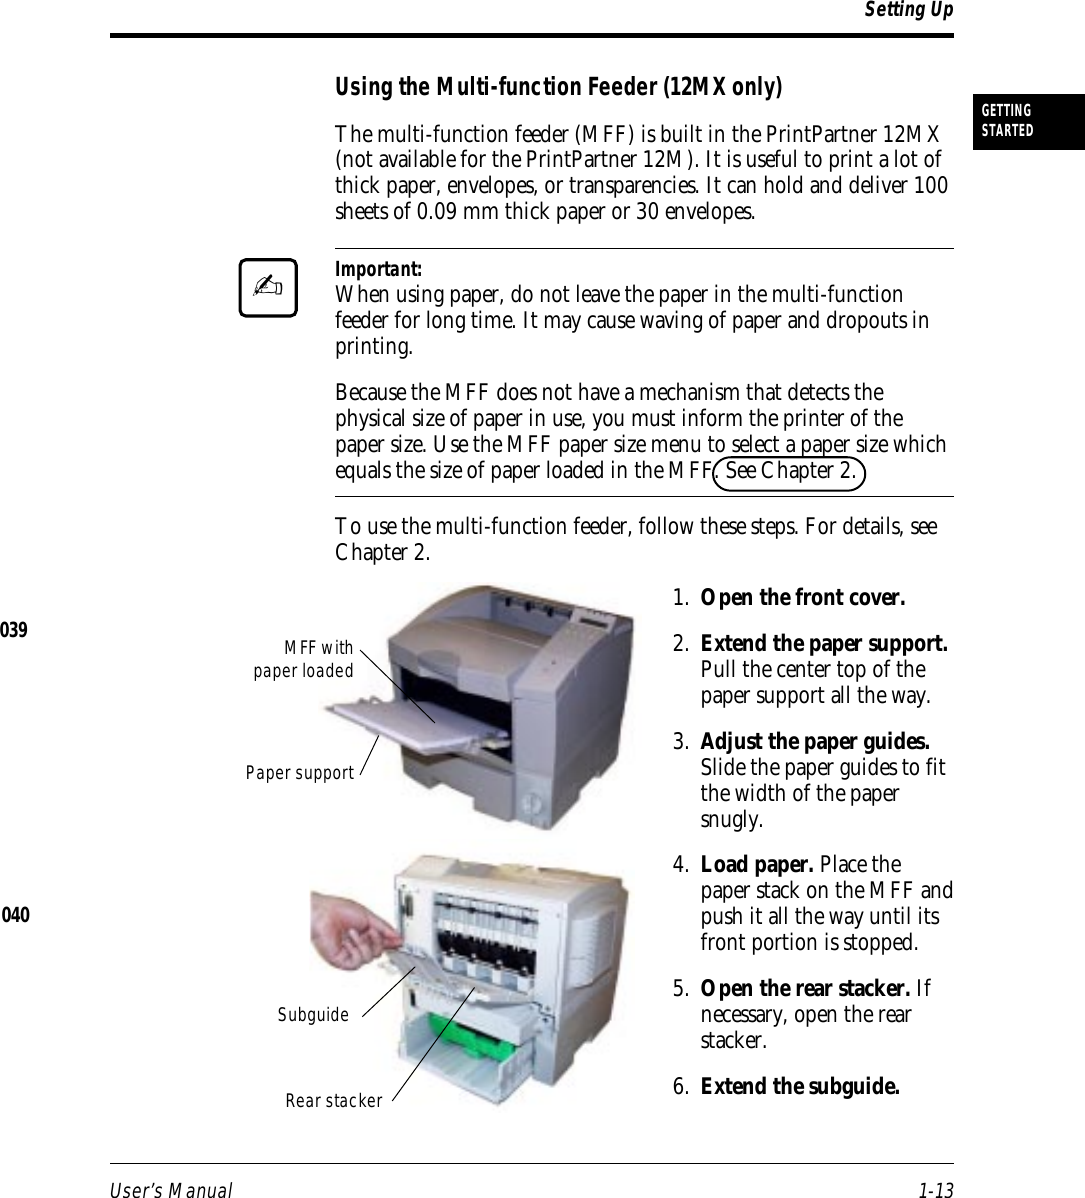 User’s Manual 1-13GETTINGSTARTEDUsing the Multi-function Feeder (12MX only)The multi-function feeder (MFF) is built in the PrintPartner 12MX(not available for the PrintPartner 12M). It is useful to print a lot ofthick paper, envelopes, or transparencies. It can hold and deliver 100sheets of 0.09 mm thick paper or 30 envelopes.Important:When using paper, do not leave the paper in the multi-functionfeeder for long time. It may cause waving of paper and dropouts inprinting.Because the MFF does not have a mechanism that detects thephysical size of paper in use, you must inform the printer of thepaper size. Use the MFF paper size menu to select a paper size whichequals the size of paper loaded in the MFF. See Chapter 2.To use the multi-function feeder, follow these steps. For details, seeChapter 2.1. Open the front cover.2. Extend the paper support.Pull the center top of thepaper support all the way.3. Adjust the paper guides.Slide the paper guides to fitthe width of the papersnugly.4. Load paper. Place thepaper stack on the MFF andpush it all the way until itsfront portion is stopped.5. Open the rear stacker. Ifnecessary, open the rearstacker.6. Extend the subguide.Setting Up✍040Rear stackerPaper supportSubguideMFF withpaper loaded039